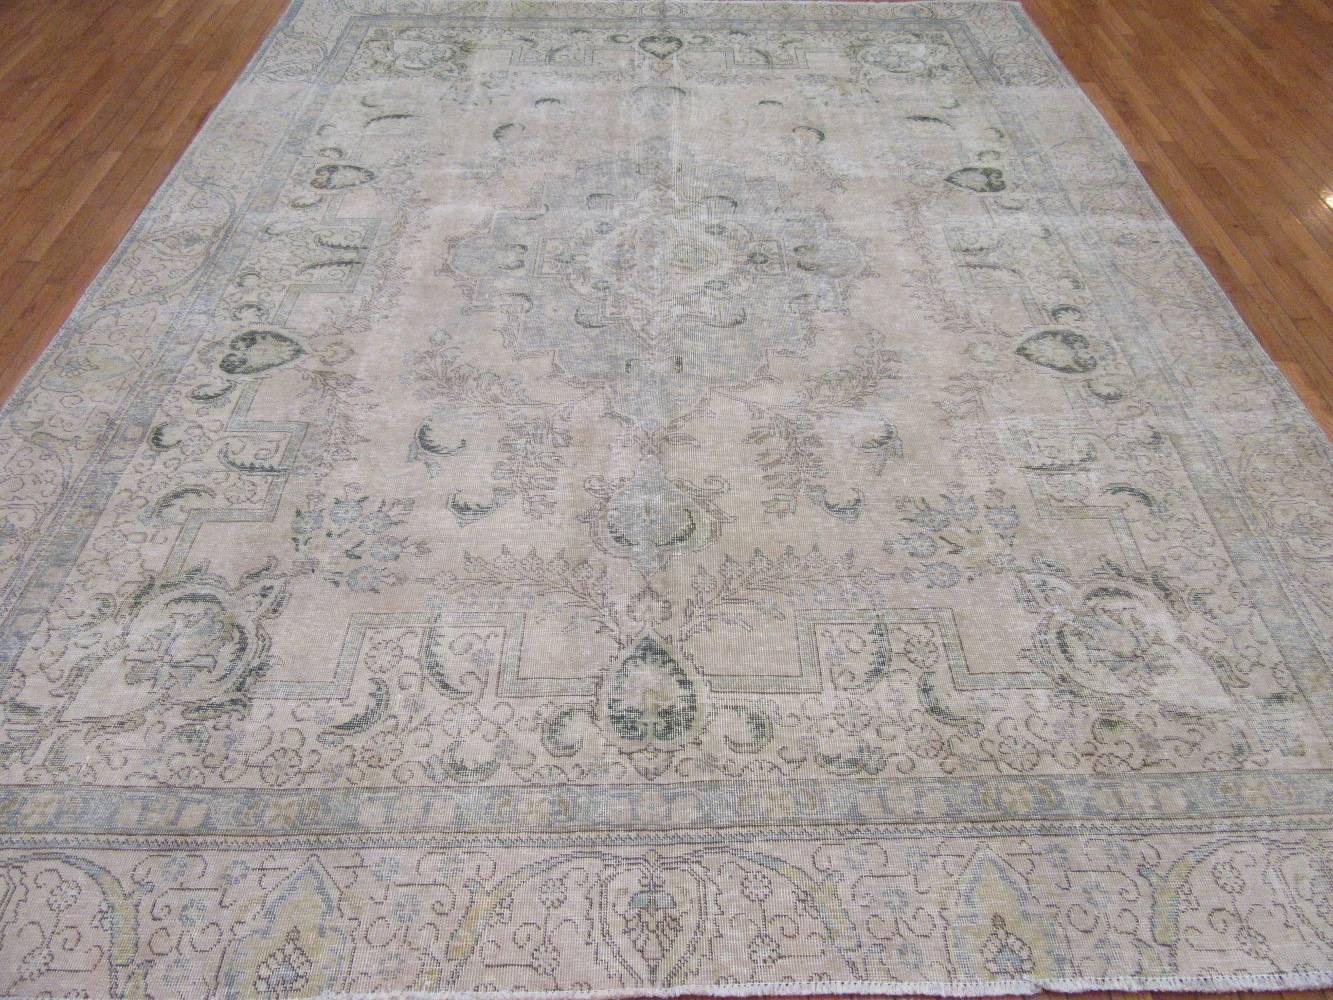 This is an old hand-knotted Persian Tabriz rug. It has been stripped down to a distressed look and white washed to achieve a soft color finish. The rug measures 9' 1'' x 11' 5''.